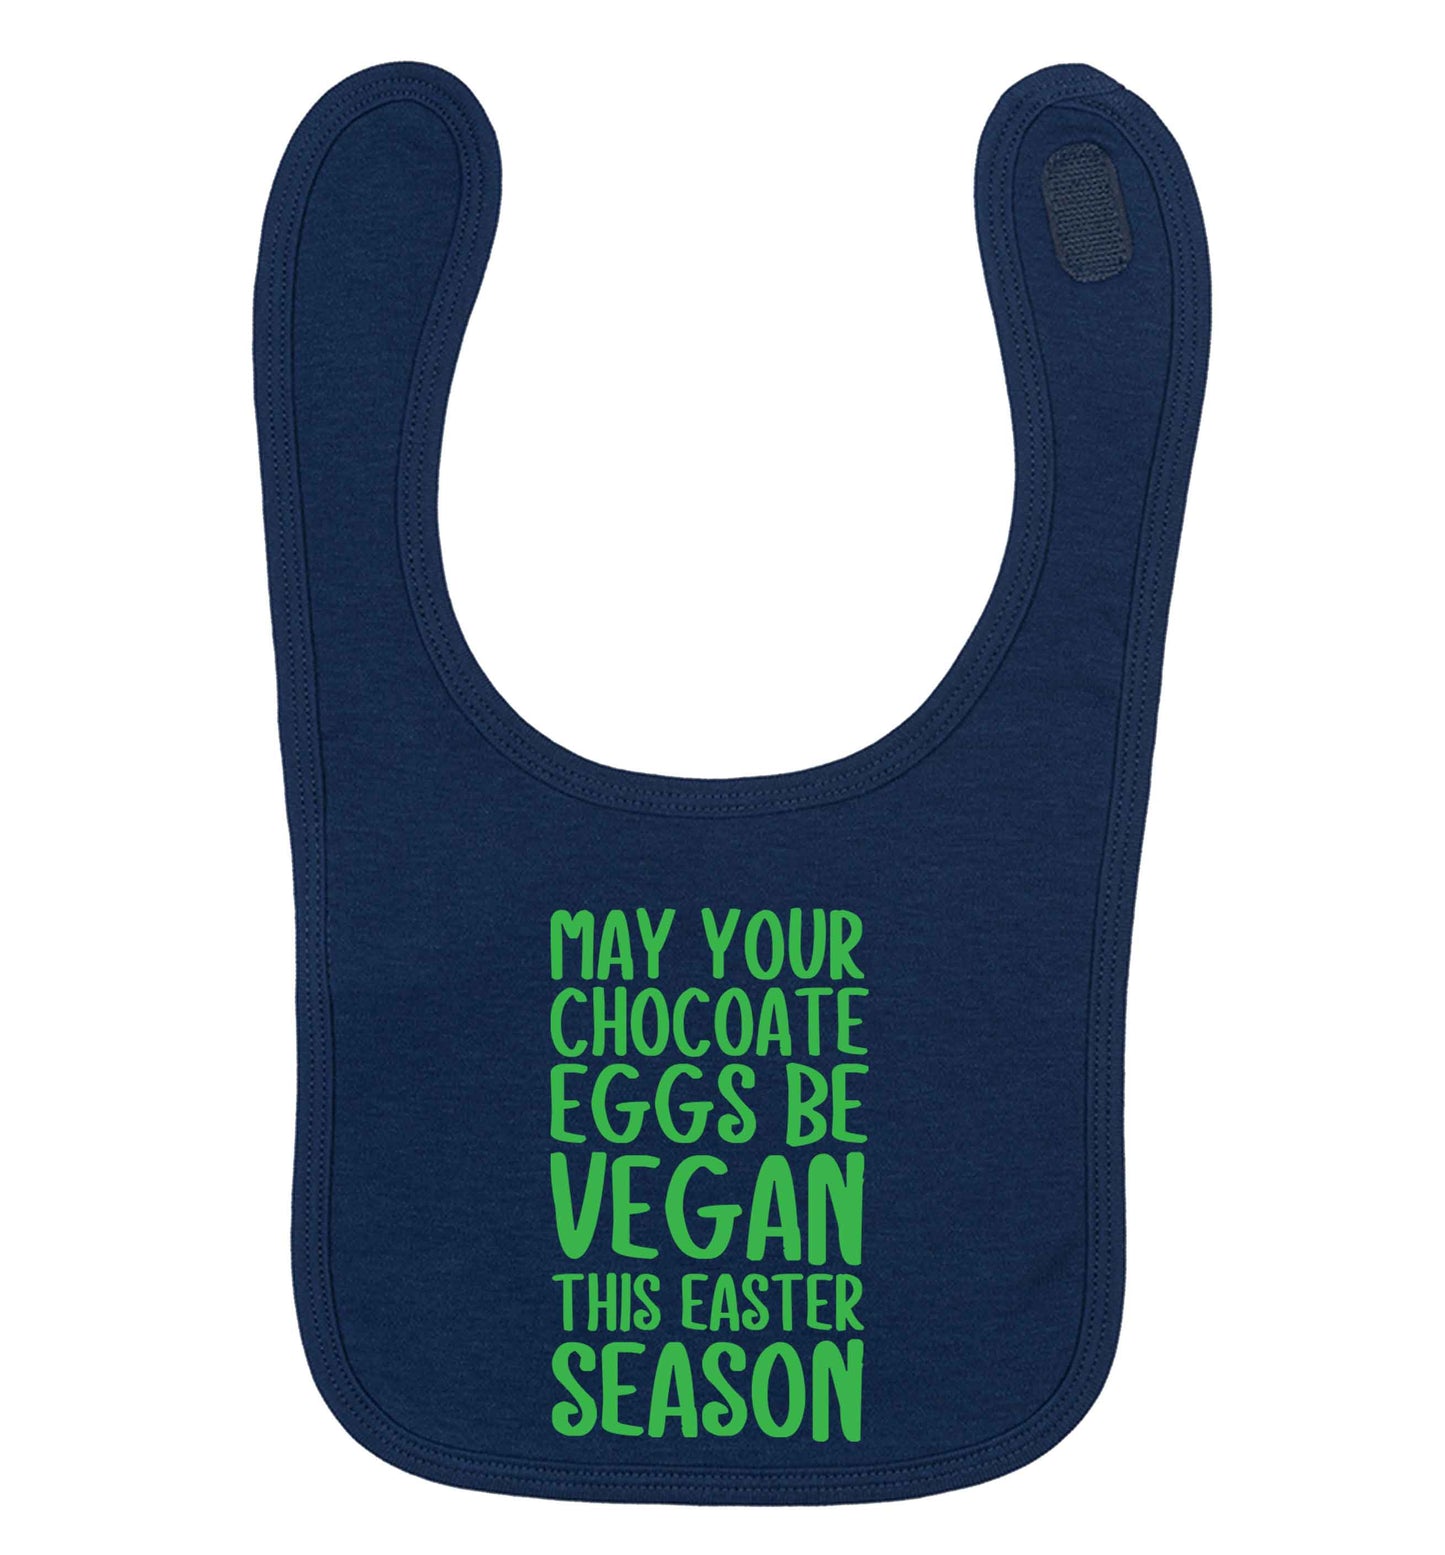 Easter bunny approved! Vegans will love this easter themed navy baby bib